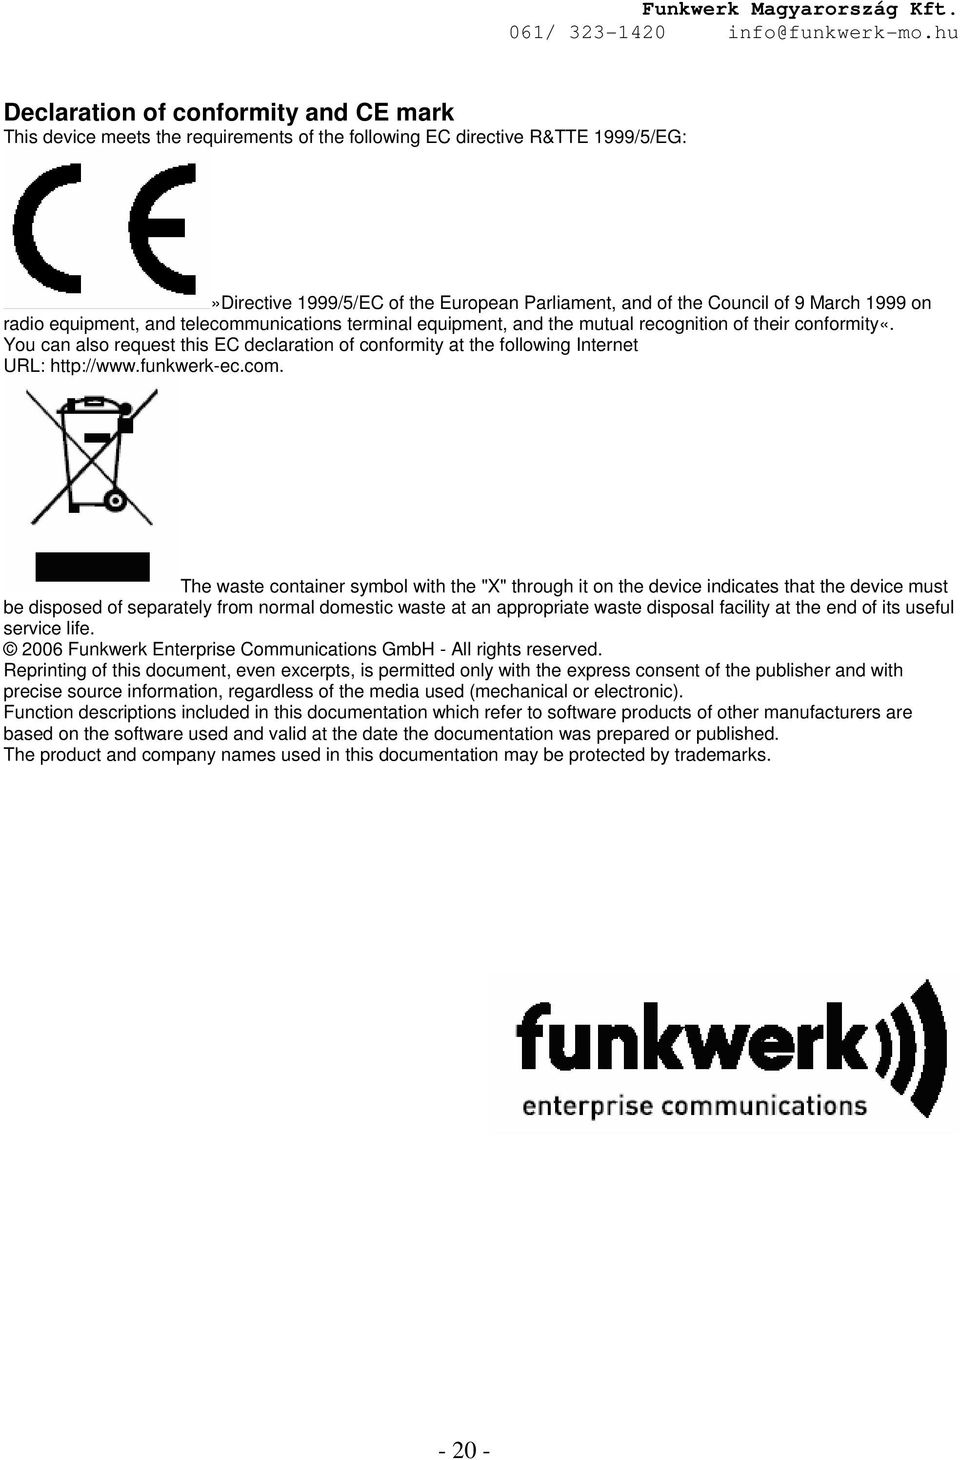 You can also request this EC declaration of conformity at the following Internet URL: http://www.funkwerk-ec.com.